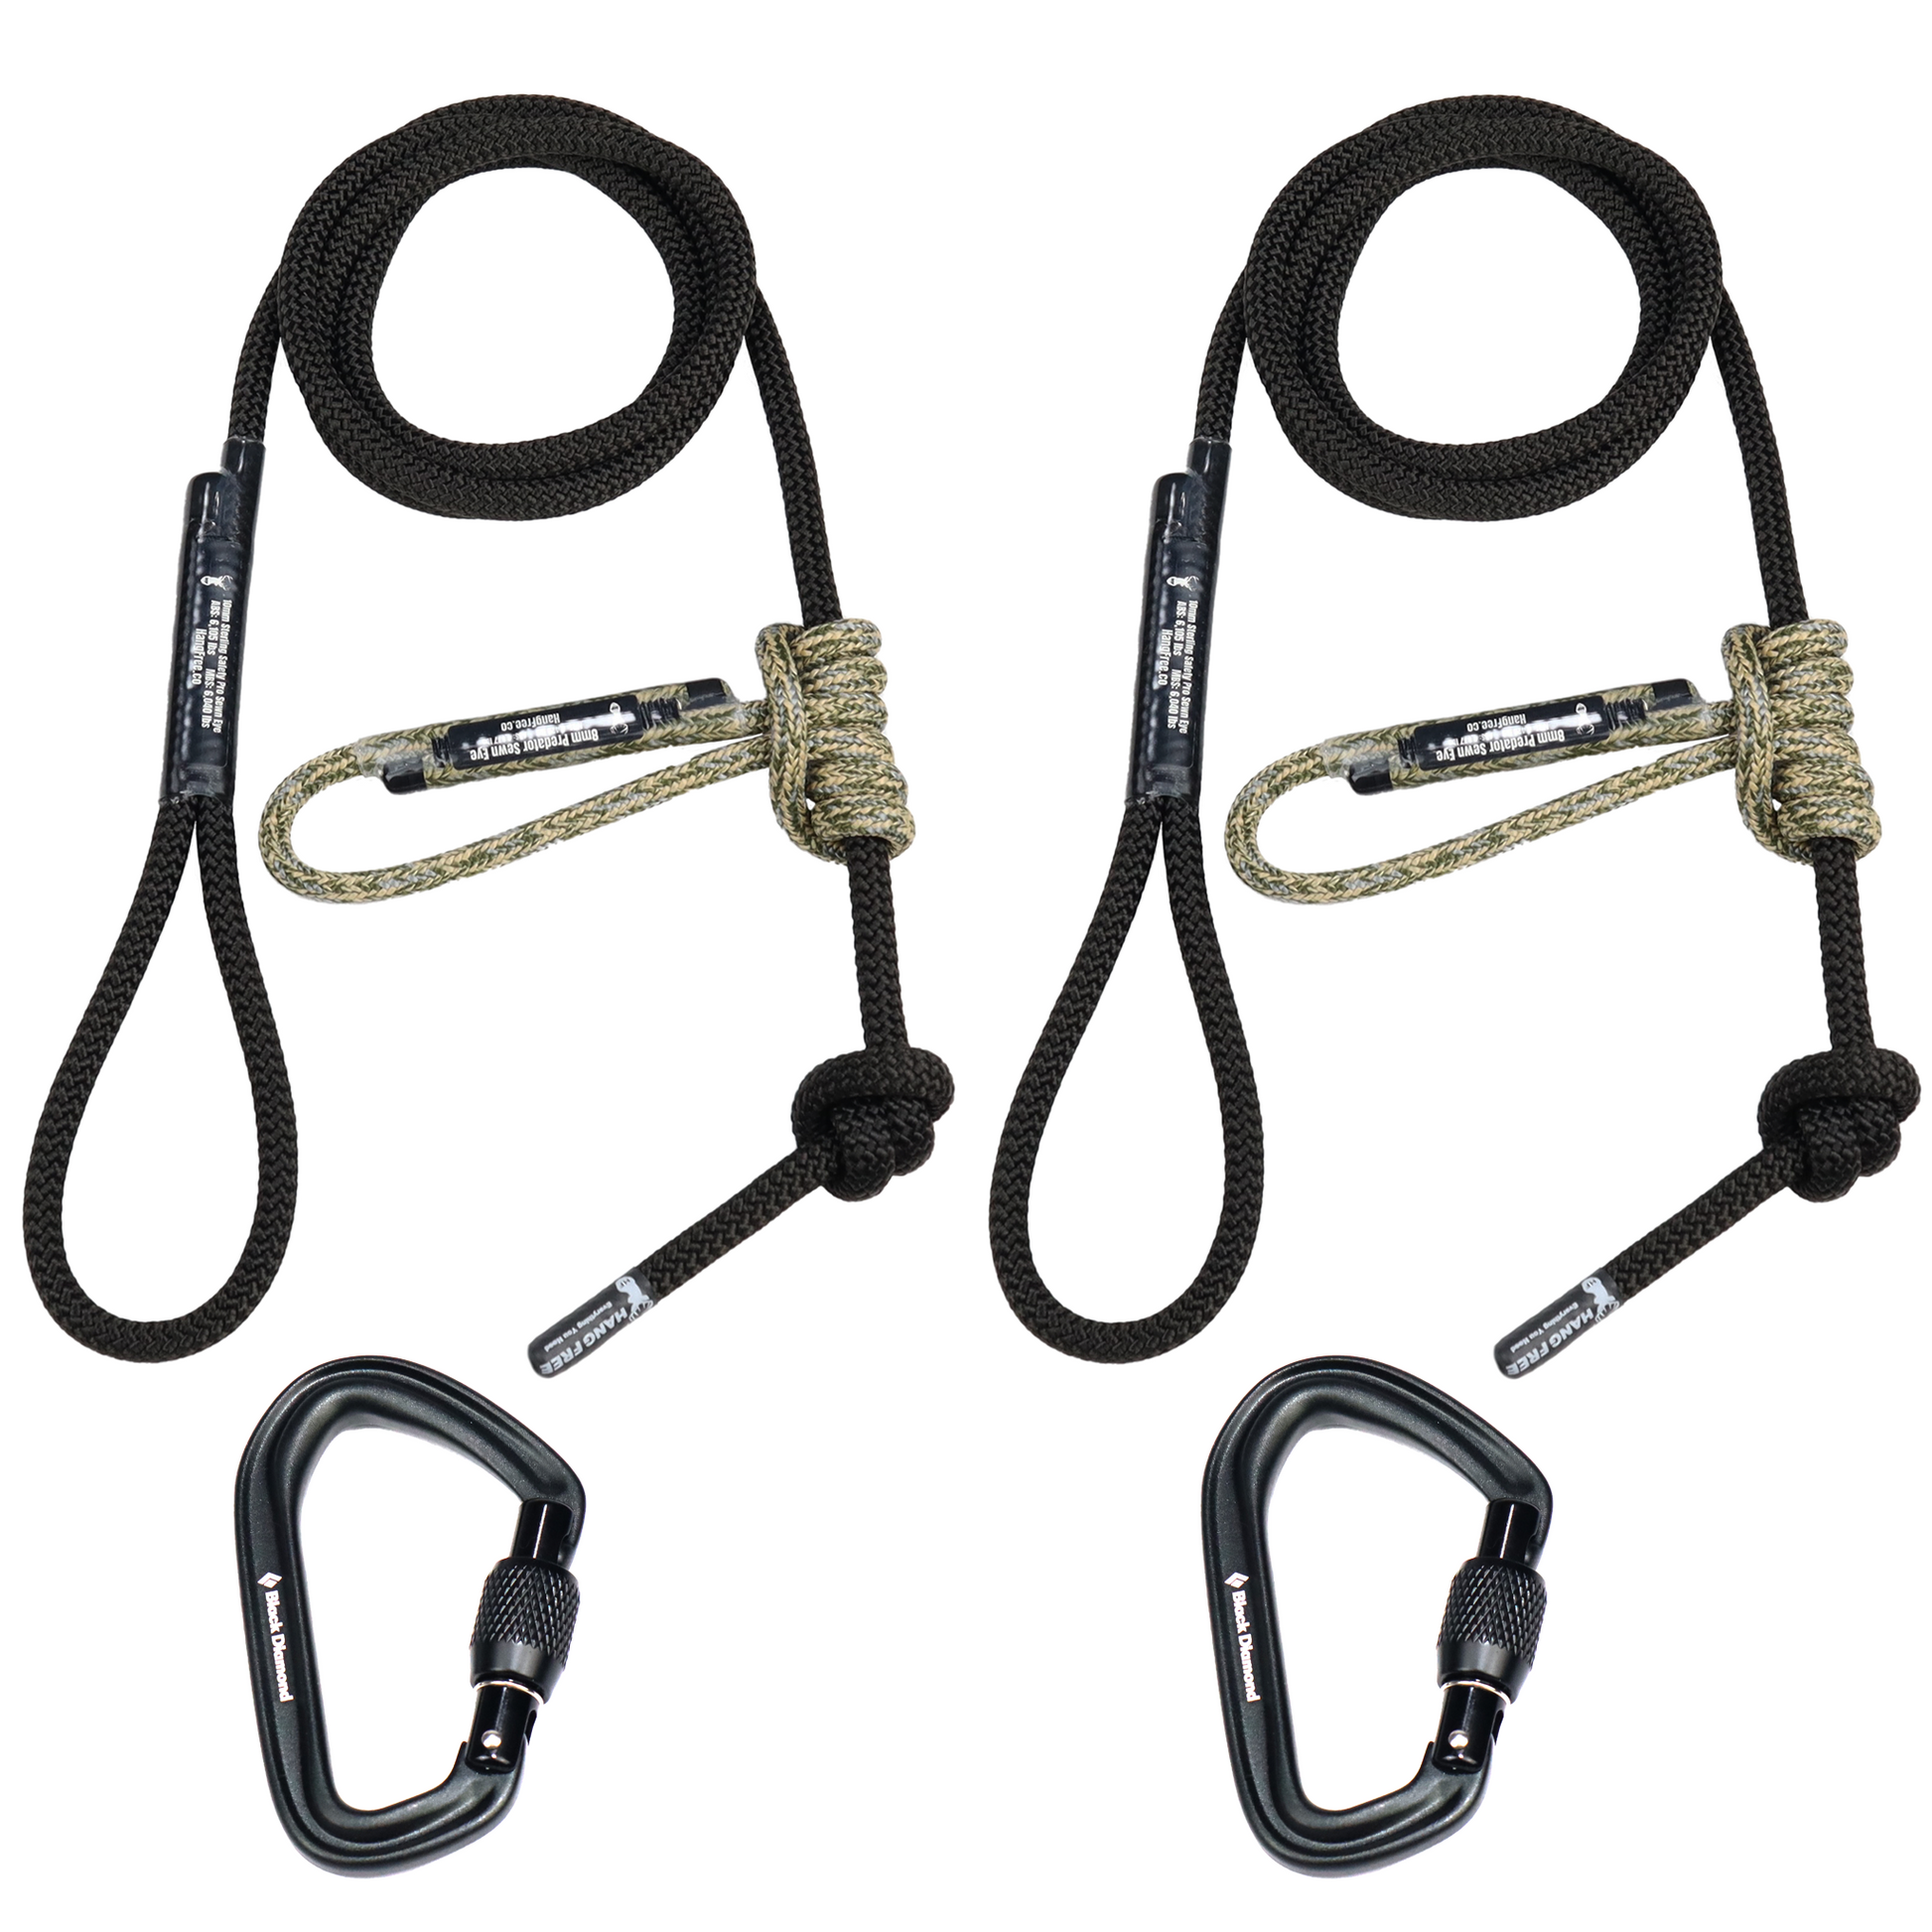 10mm BlackOut Tether & Lineman's Package with Desert Camo Prusik and Carabiners